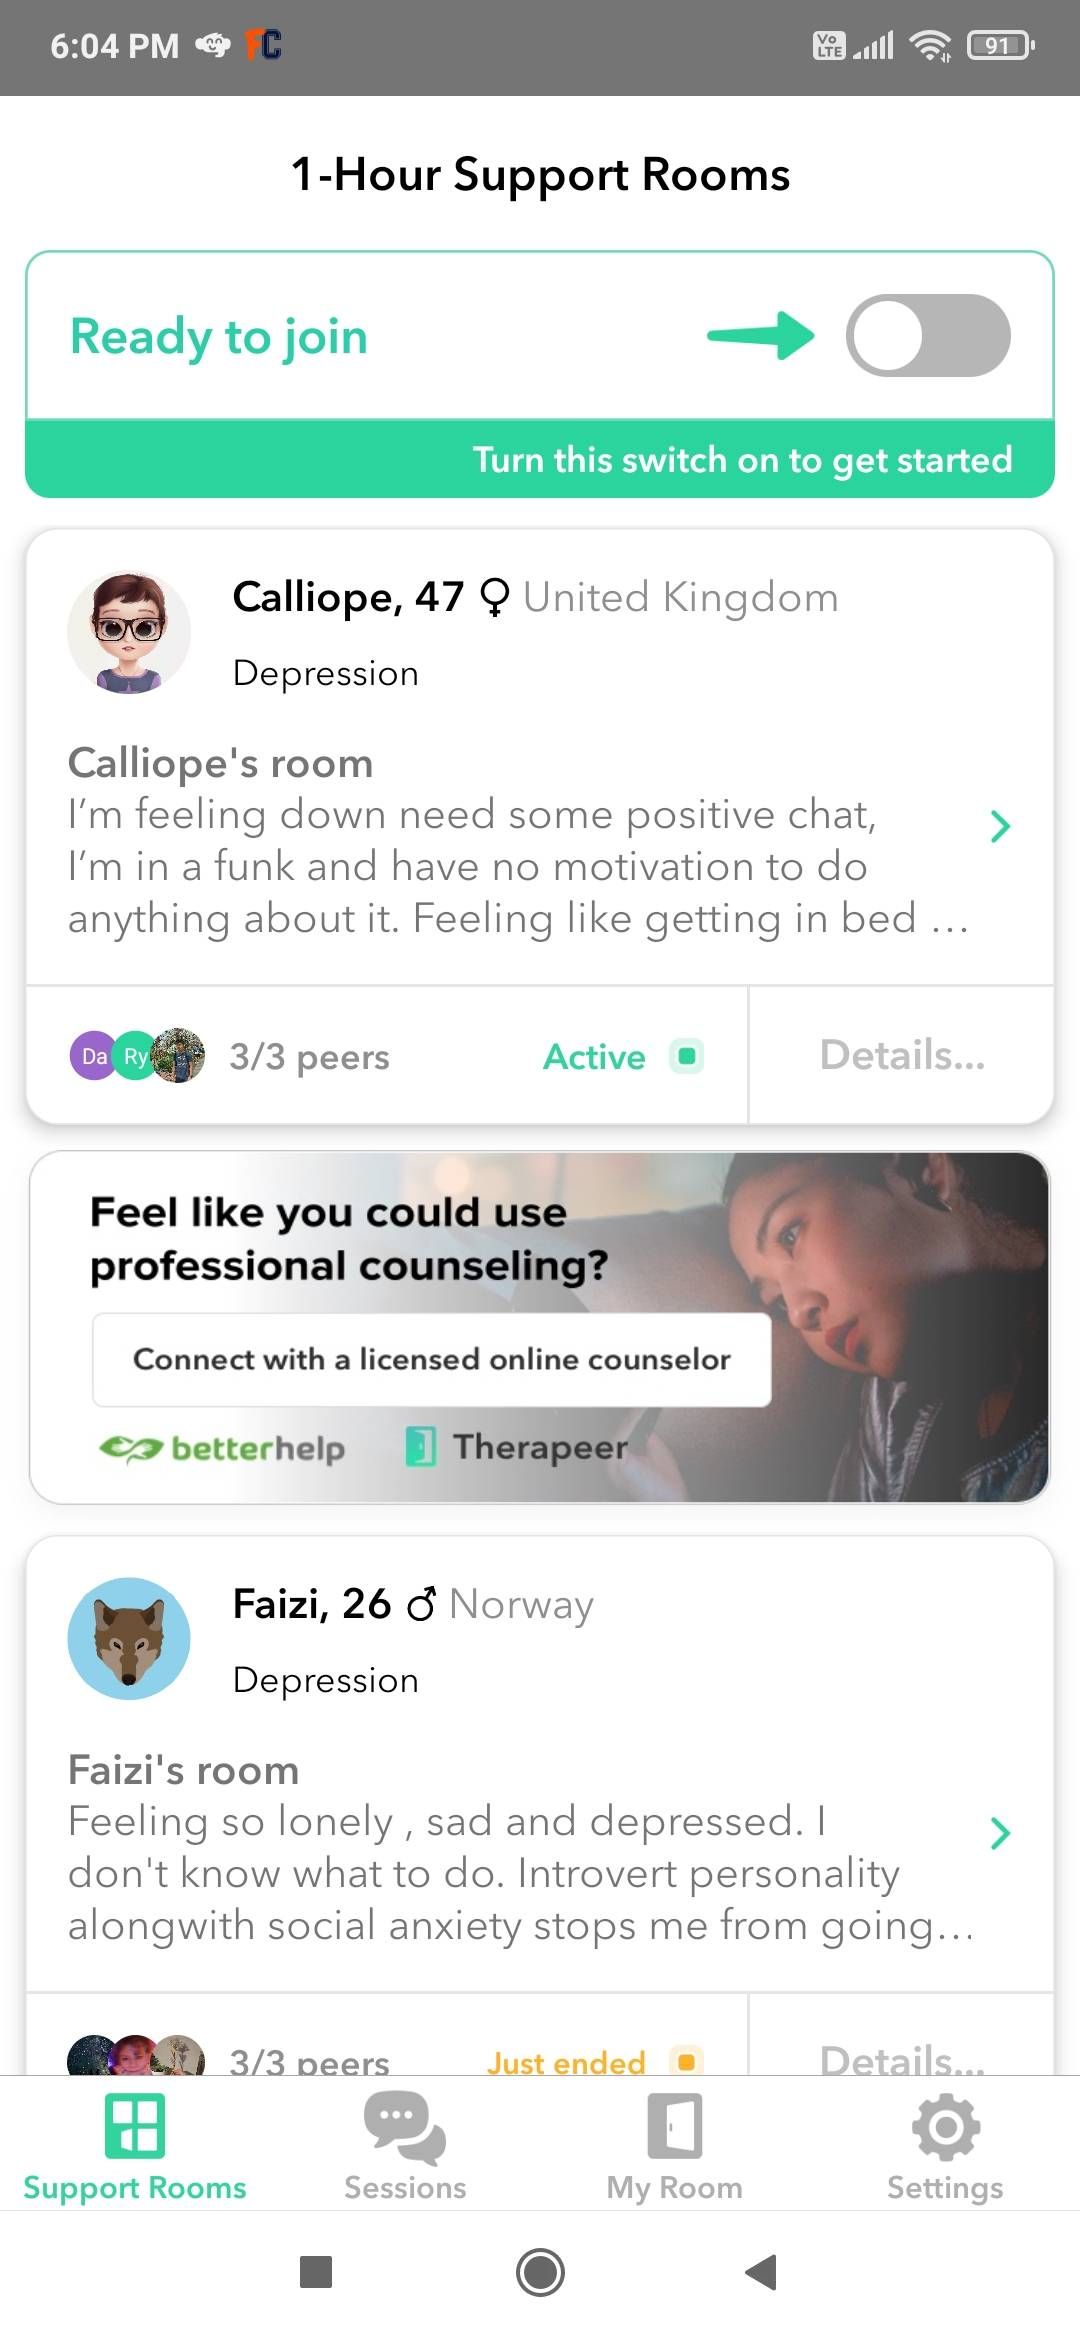 Enter a three-person, hour-long chatroom at Therapeer to discuss your own problems or listen to someone else vent about their issues